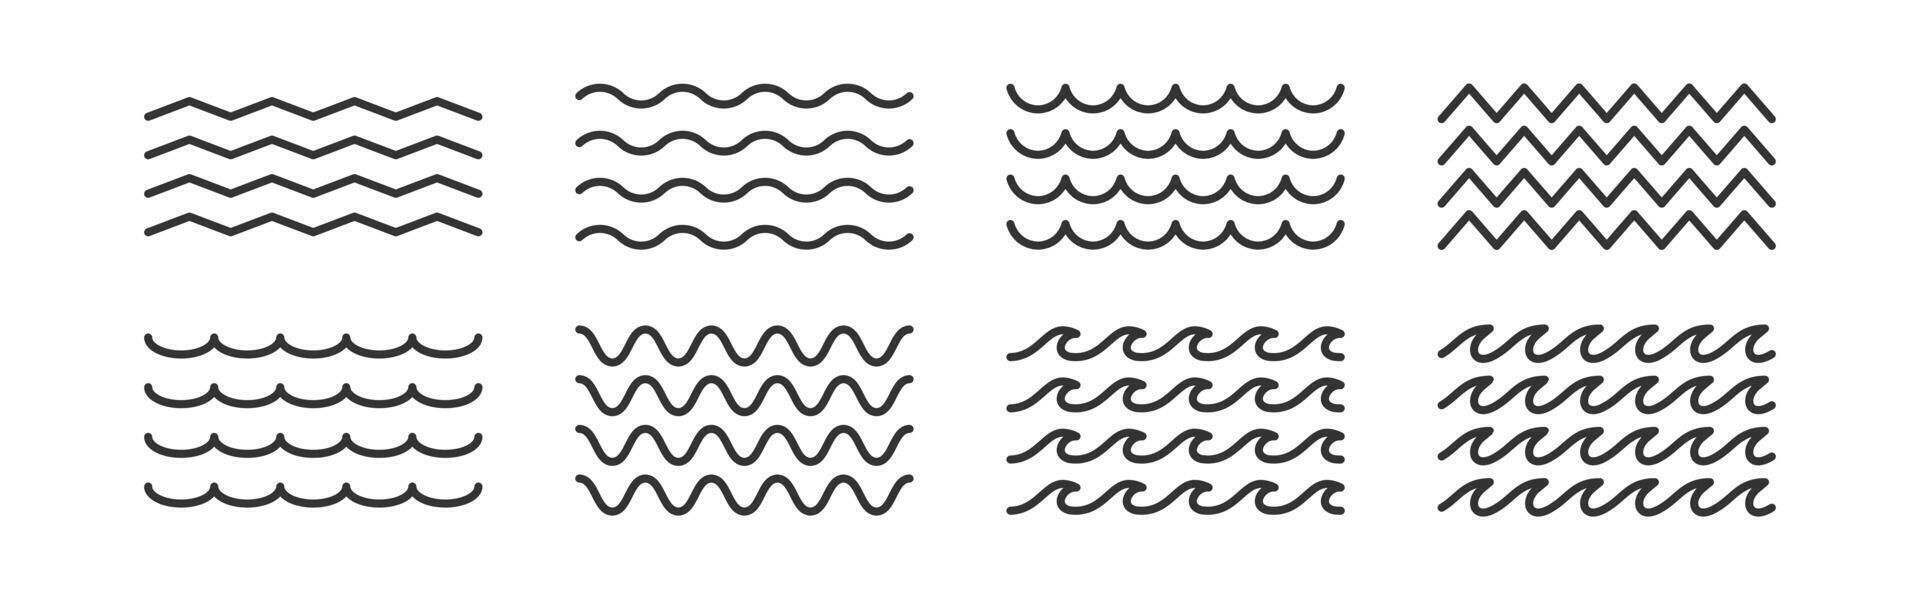 Water wave icon. Liquid abstract shape. Ocean wave element. Nature pattern sign. vector